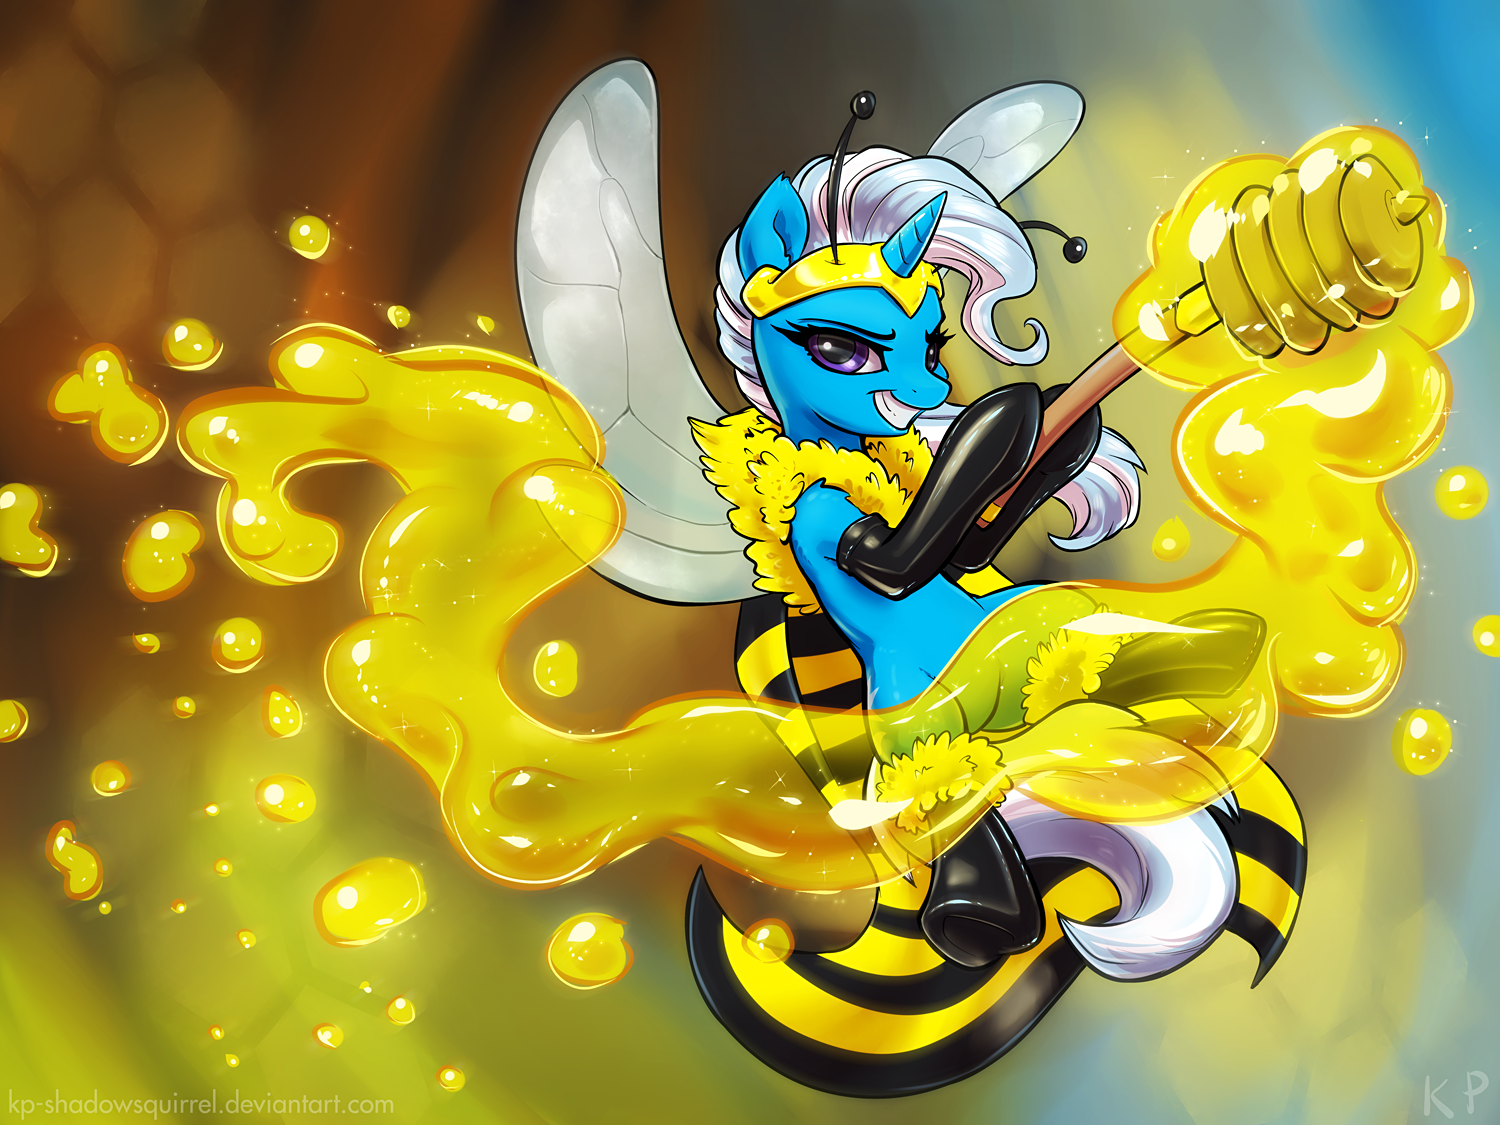 [Obrázek: trixie_the_bee_by_kp_shadowsquirrel-d8l39wd.png]